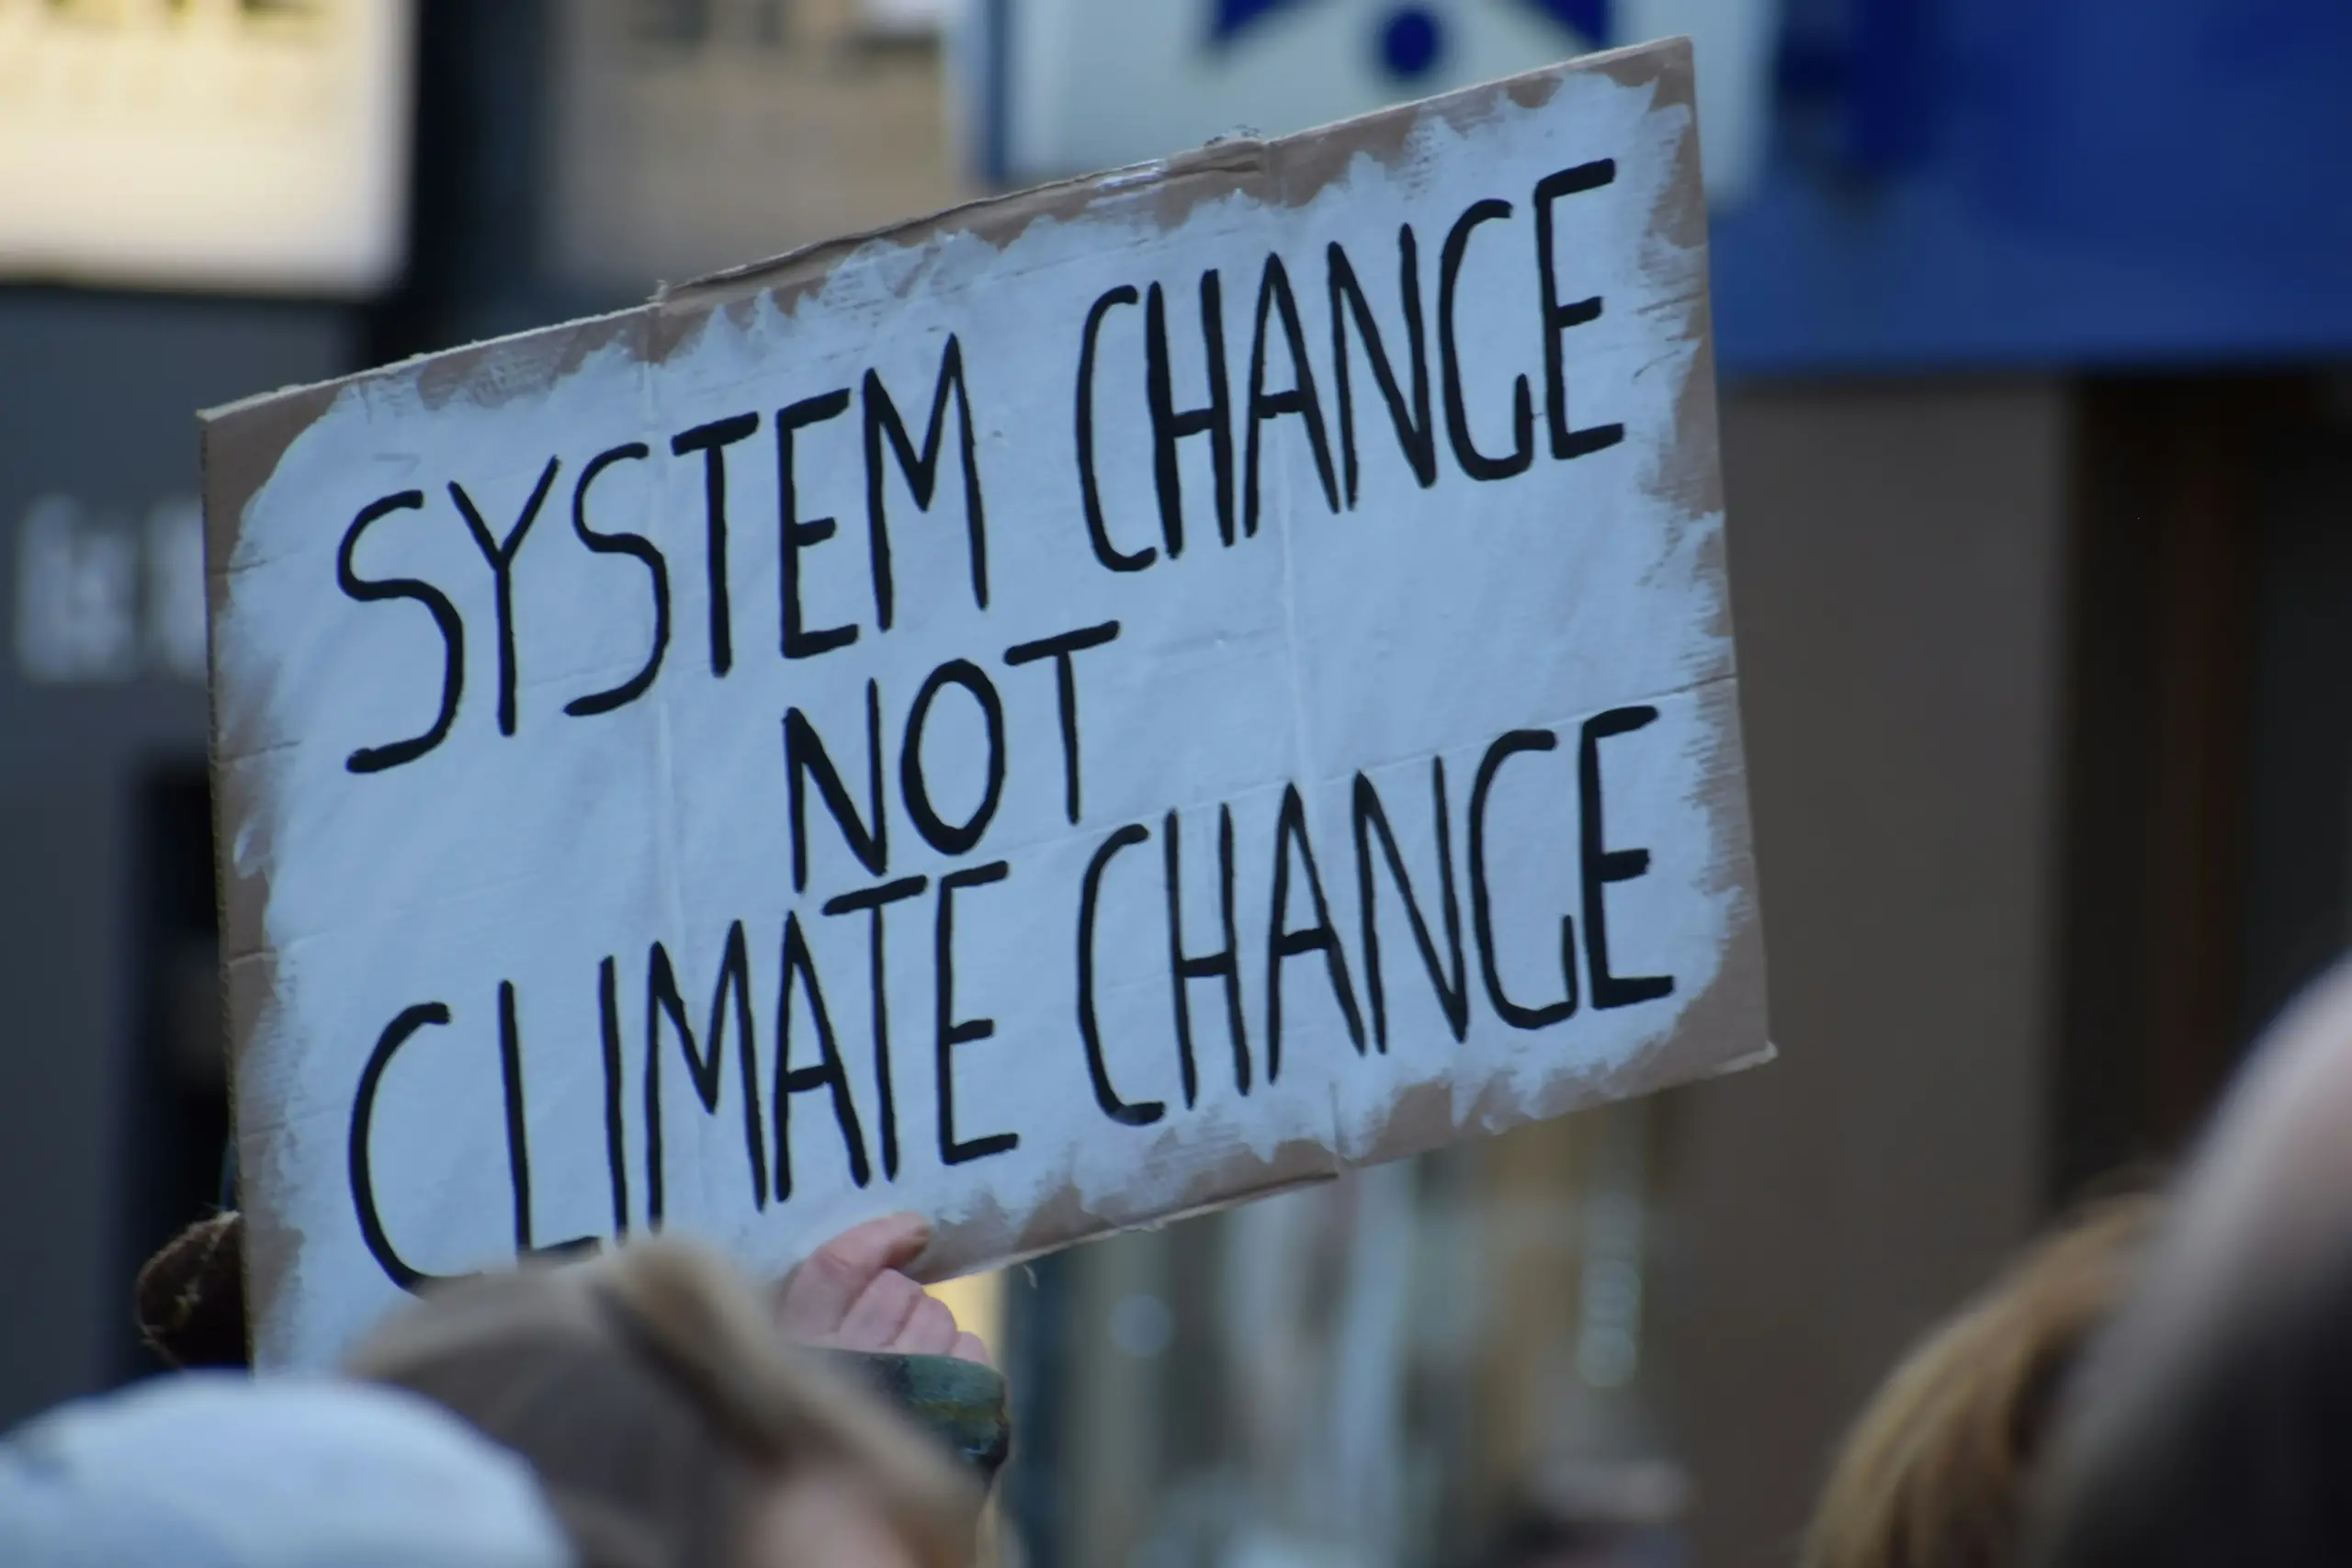 Protest sign on cardboard that says "SYSTEM CHANGE NOT CLIMATE CHANGE"